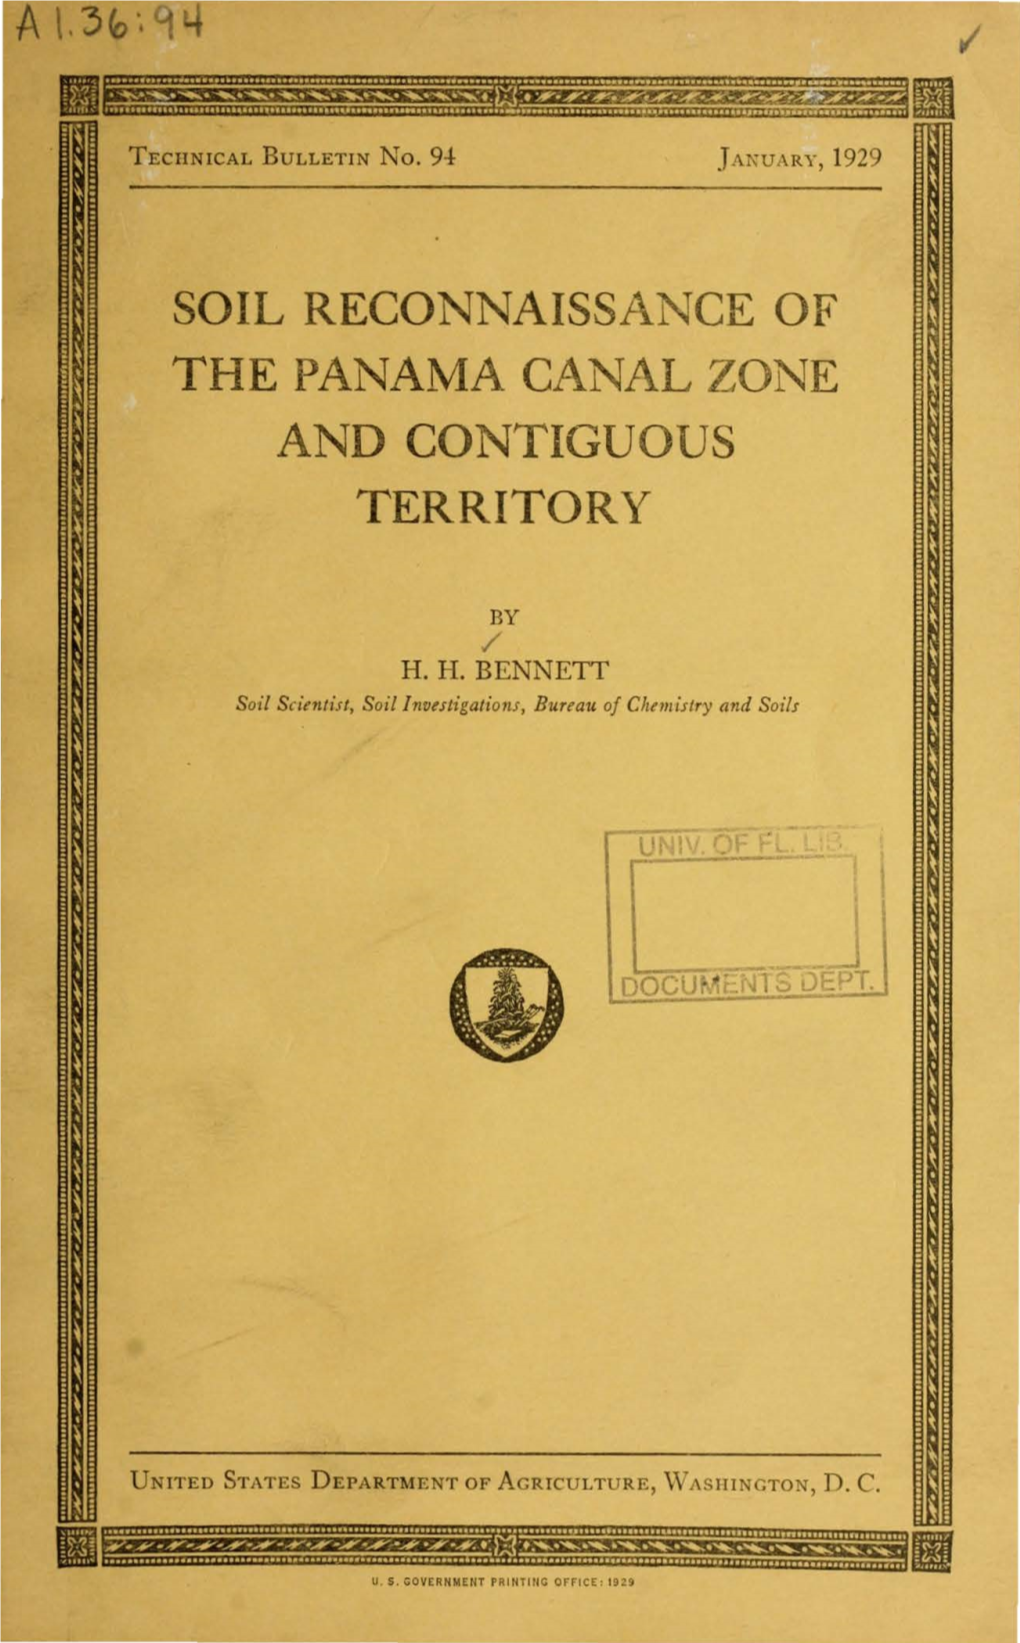 Soil Reconnaissance of the Panama Canal Zone and Contiguous Territory